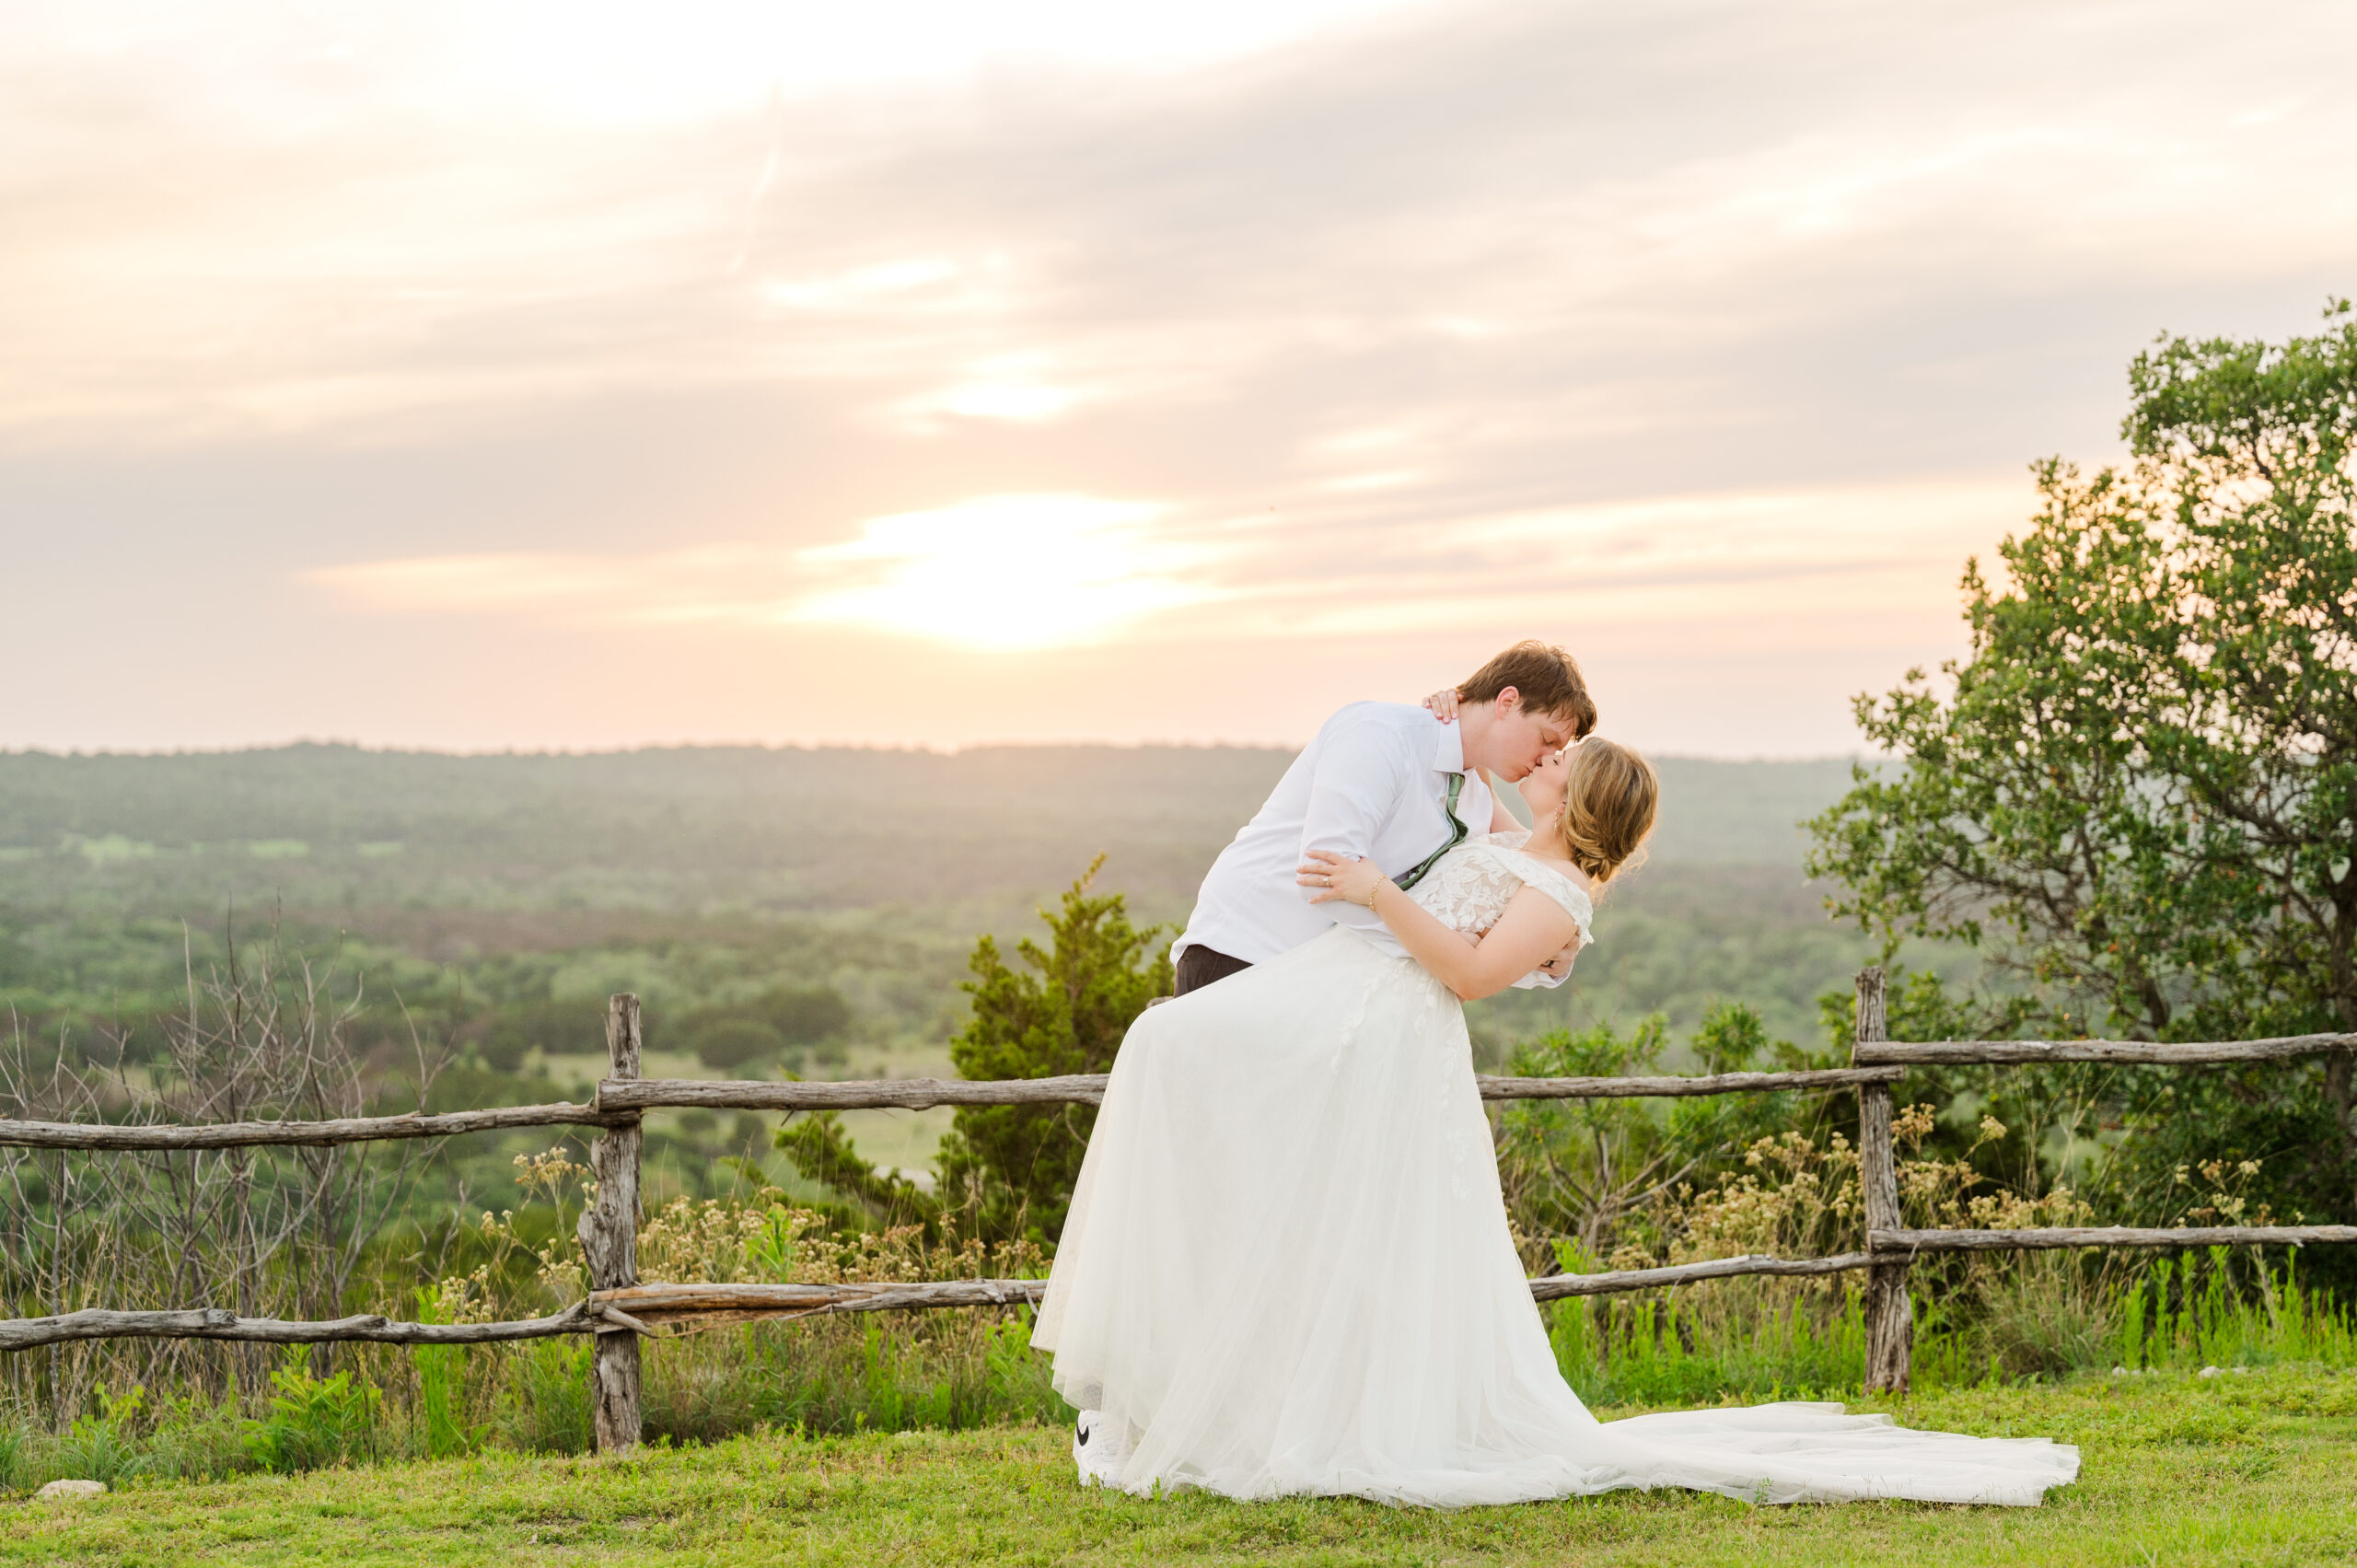 Couple shares a dip kiss at a Texas vineyard wedding with a sunset in the background